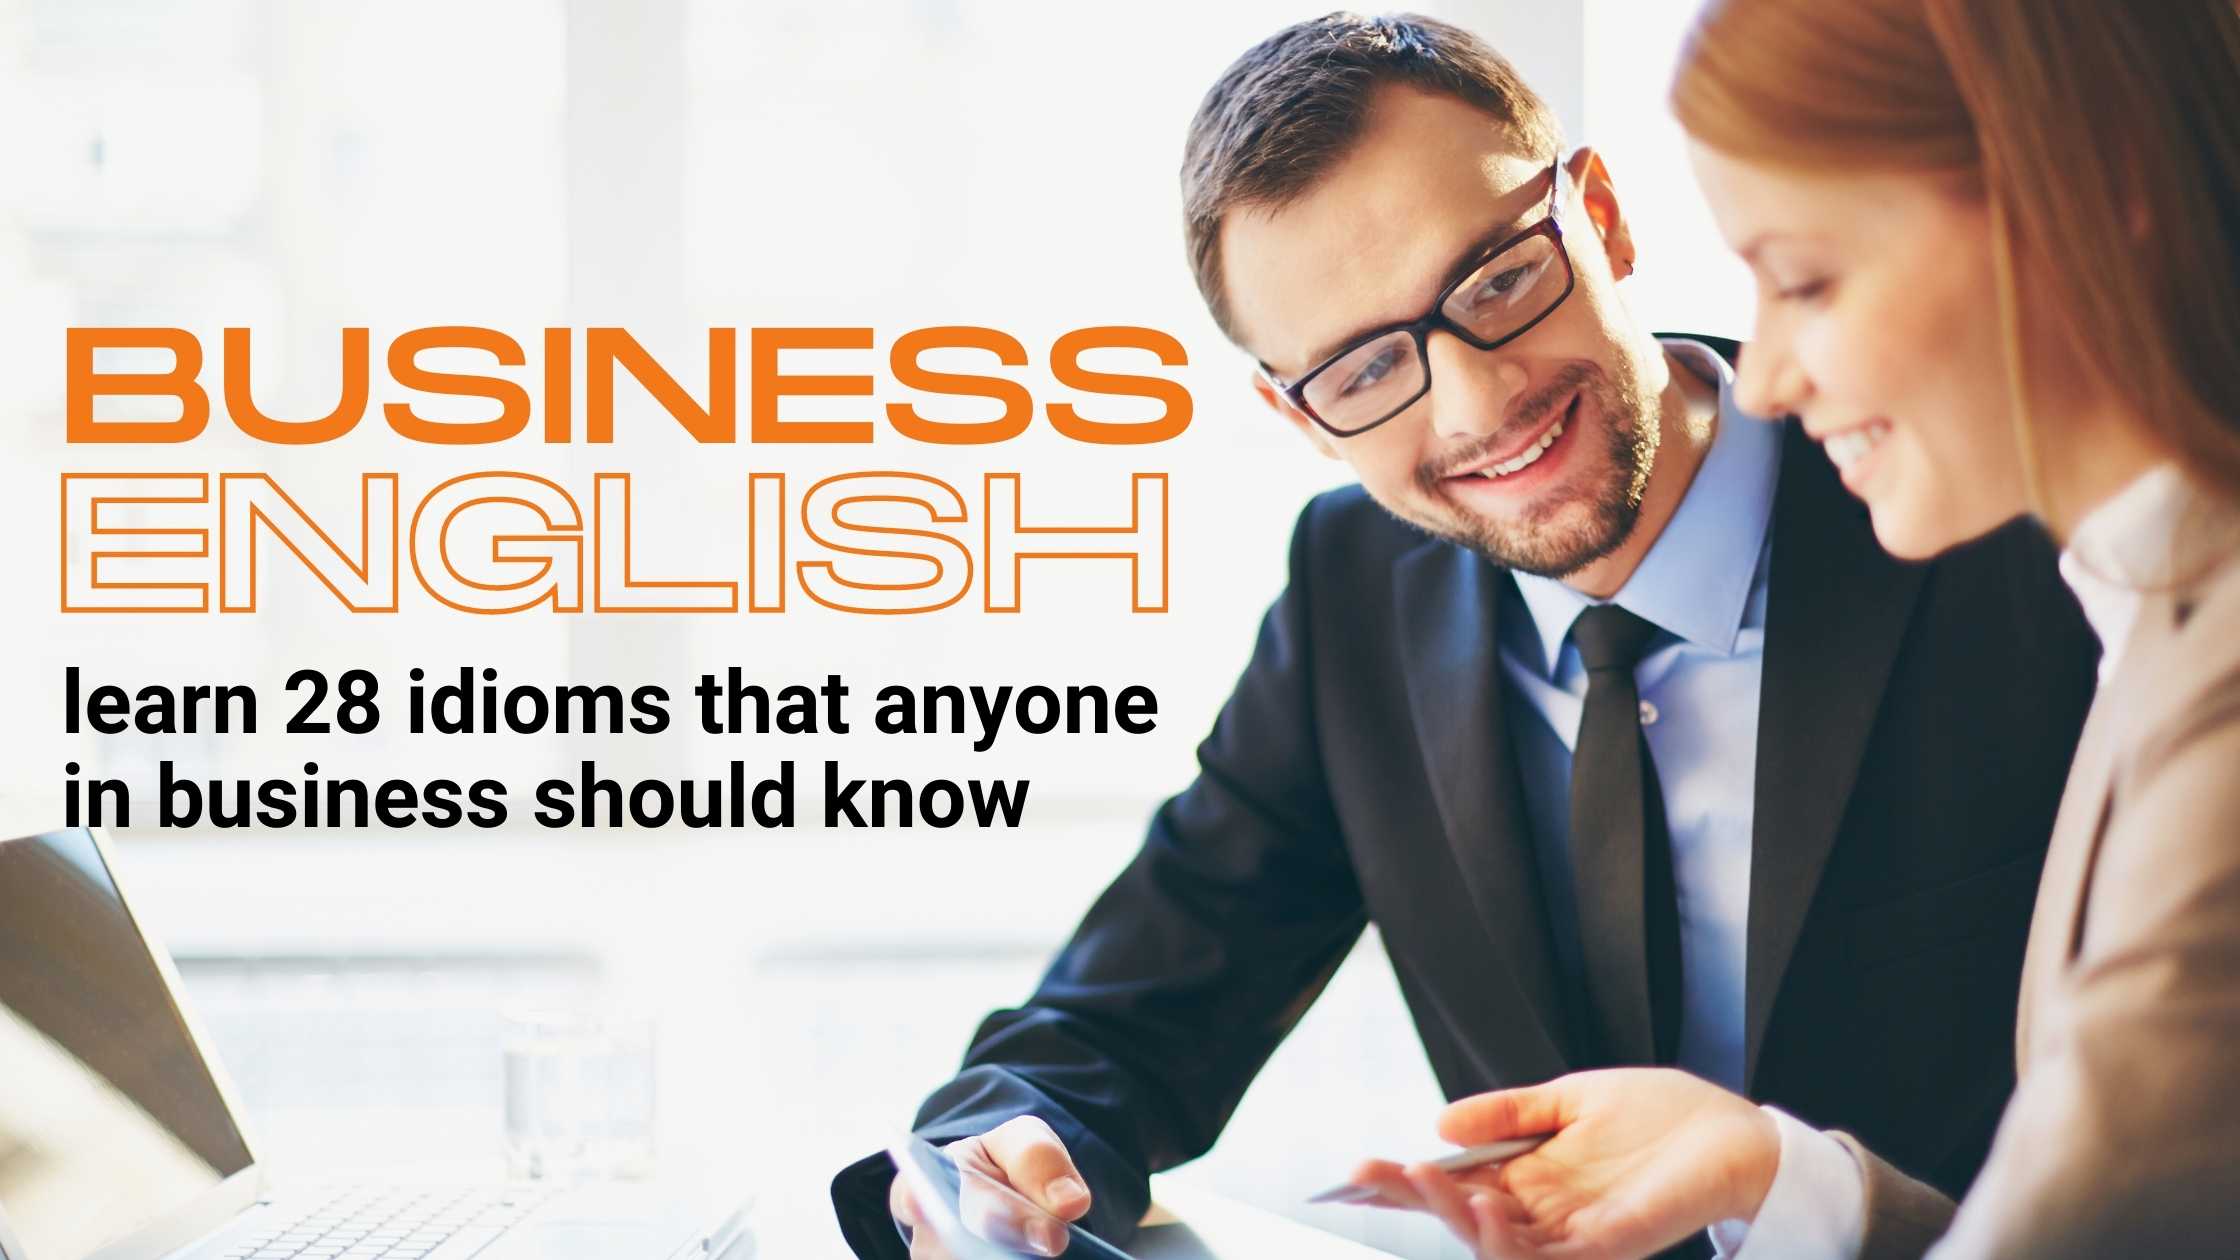 business idioms in english, business english expressions, business english idioms